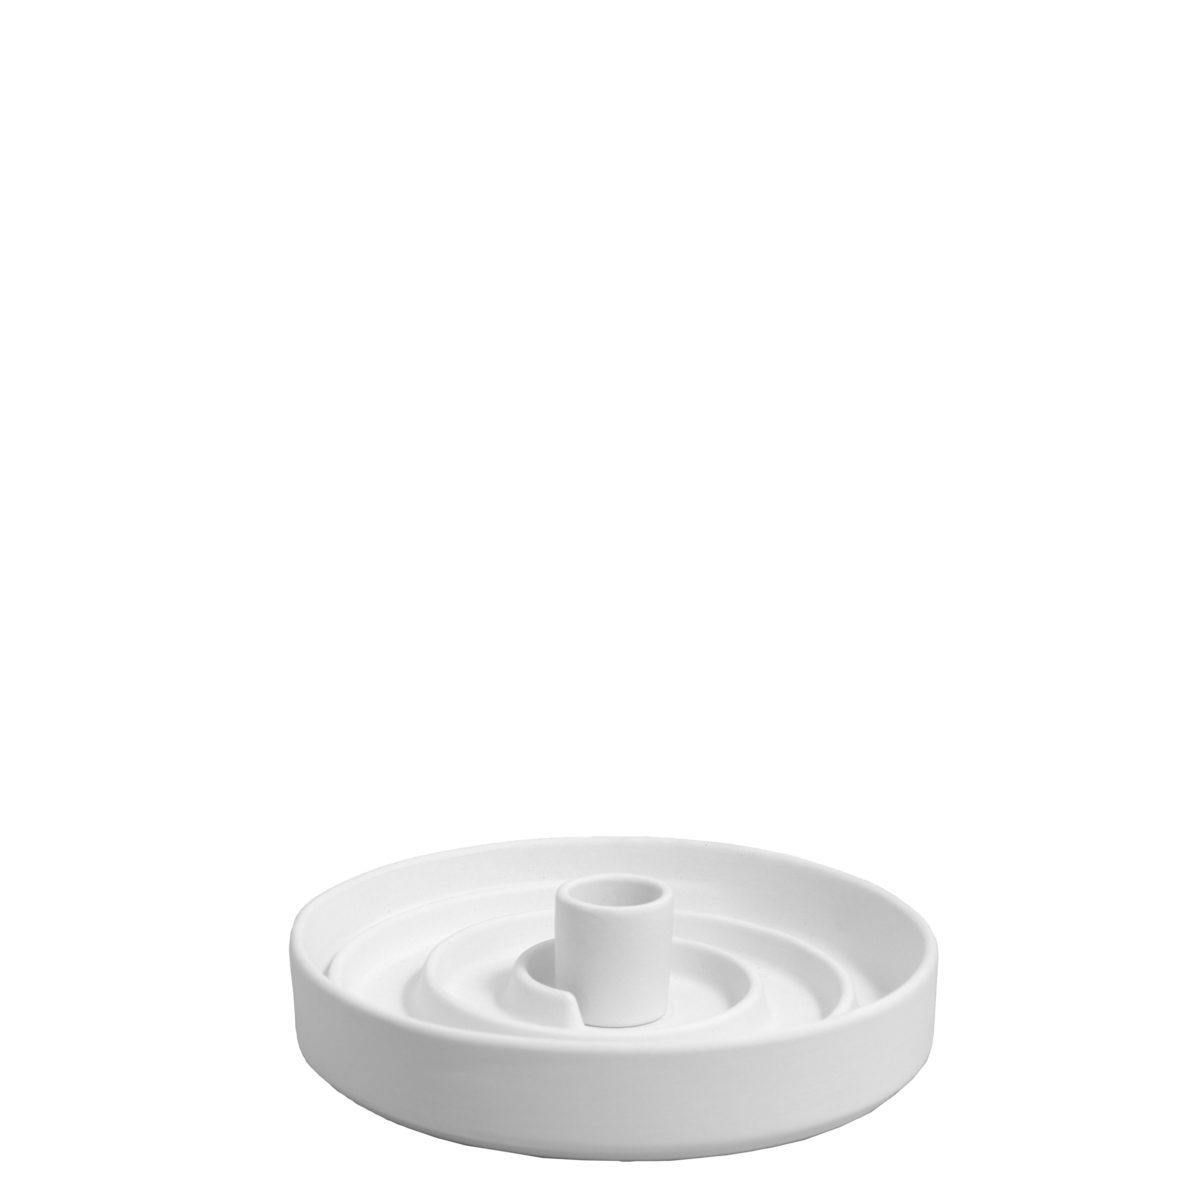 Sundhult White candlestick - Cucina-Laura